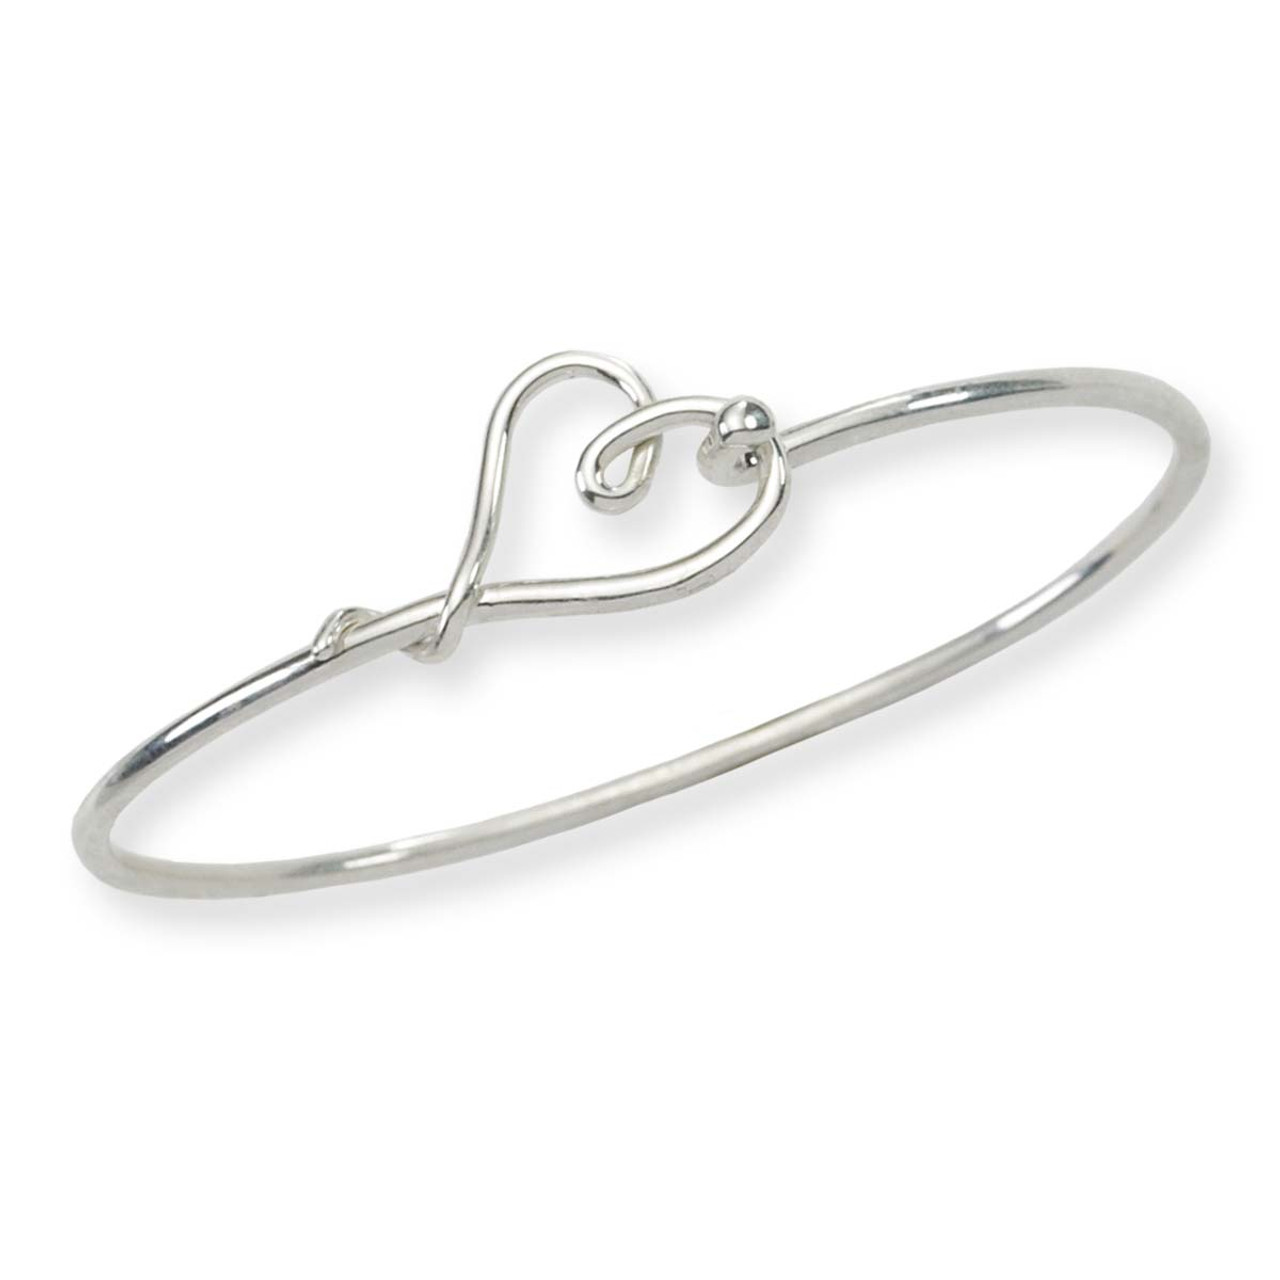 Artisan Sterling Silver Charm Bangle is perfect to wear every day